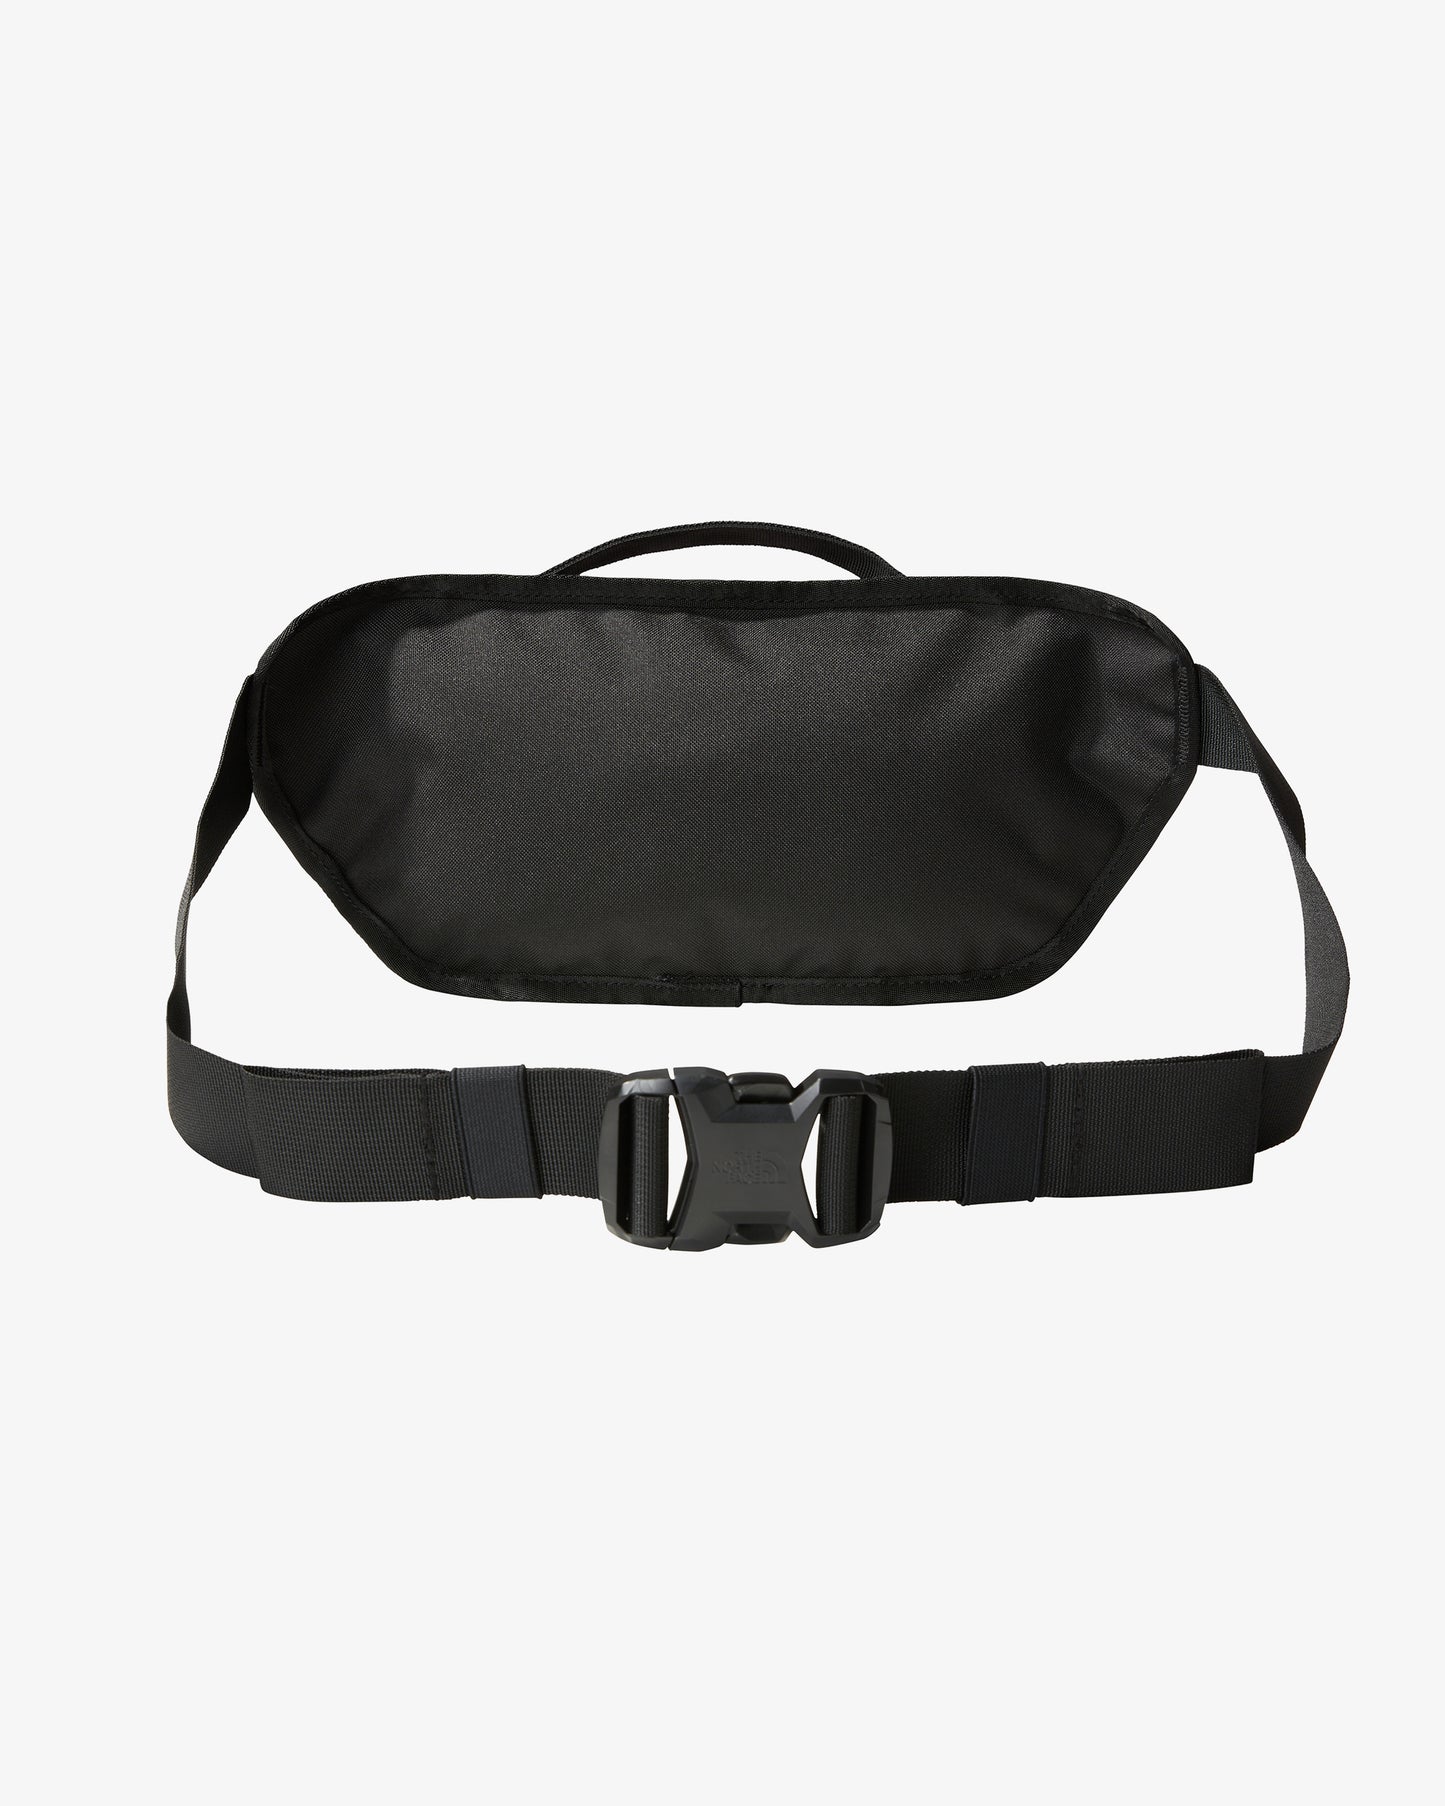 The North Face Bozer Hip Pack lll L